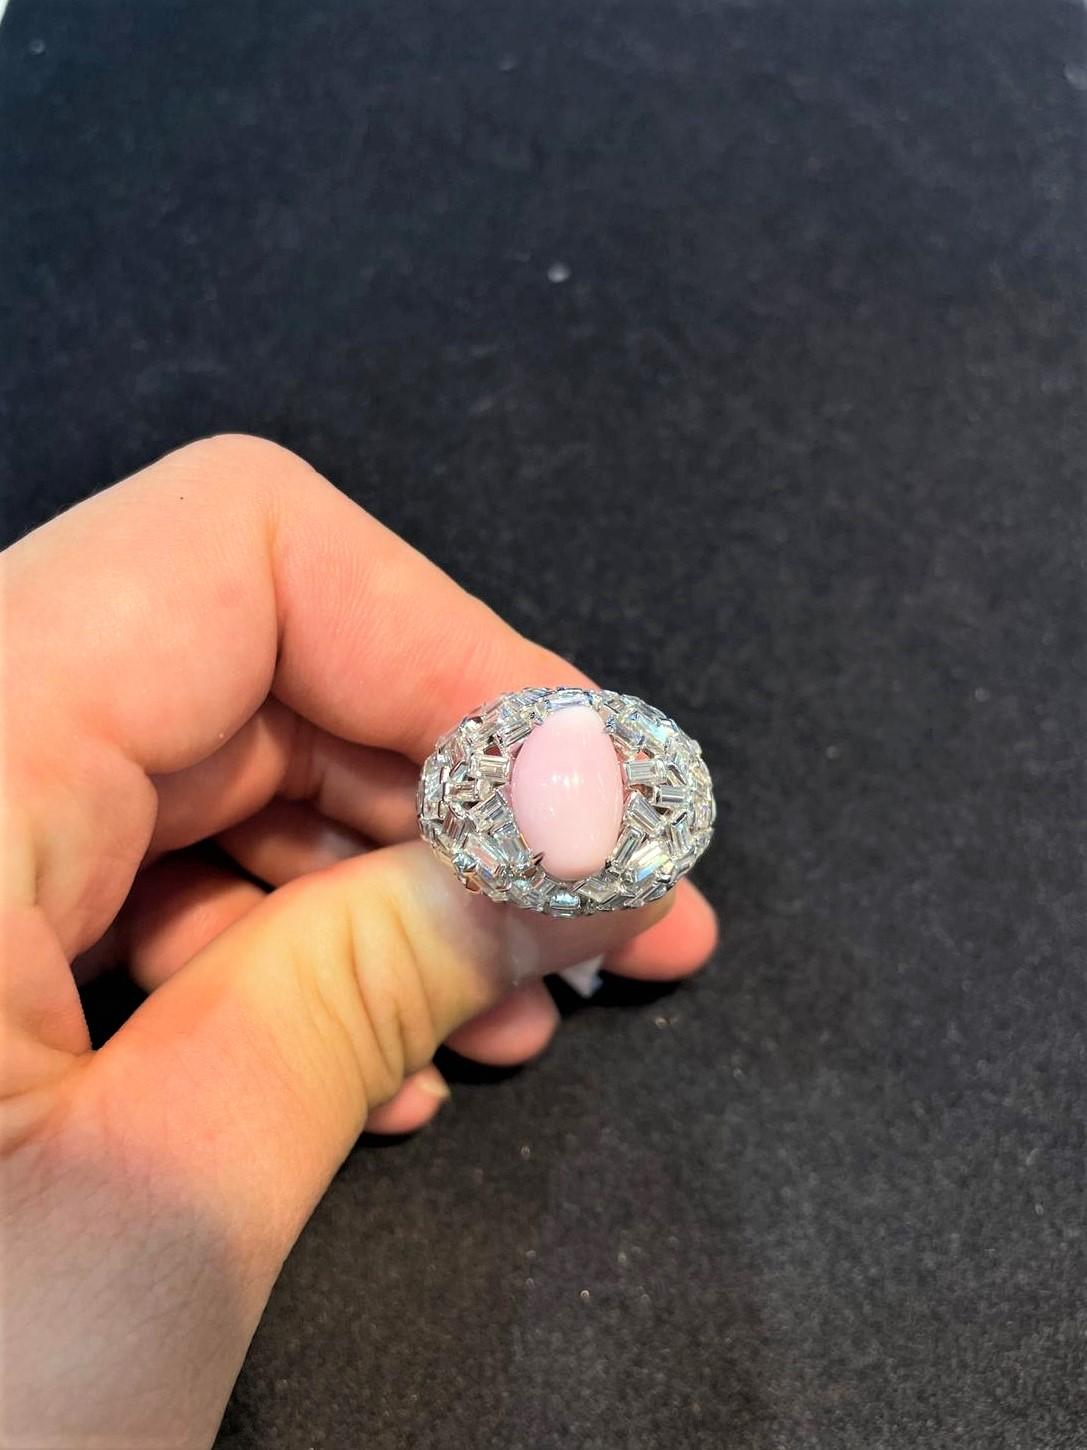 The Following Item we are Offering is this Magnificent 18KT Gold Large Extremely Rare Conch Pearl and Fancy Baguette Diamond Ring. This Gorgeous Ring features a Large Gorgeous Conch Pearl sitting atop Fancy Glittering Baguette Diamonds!! T.C.W